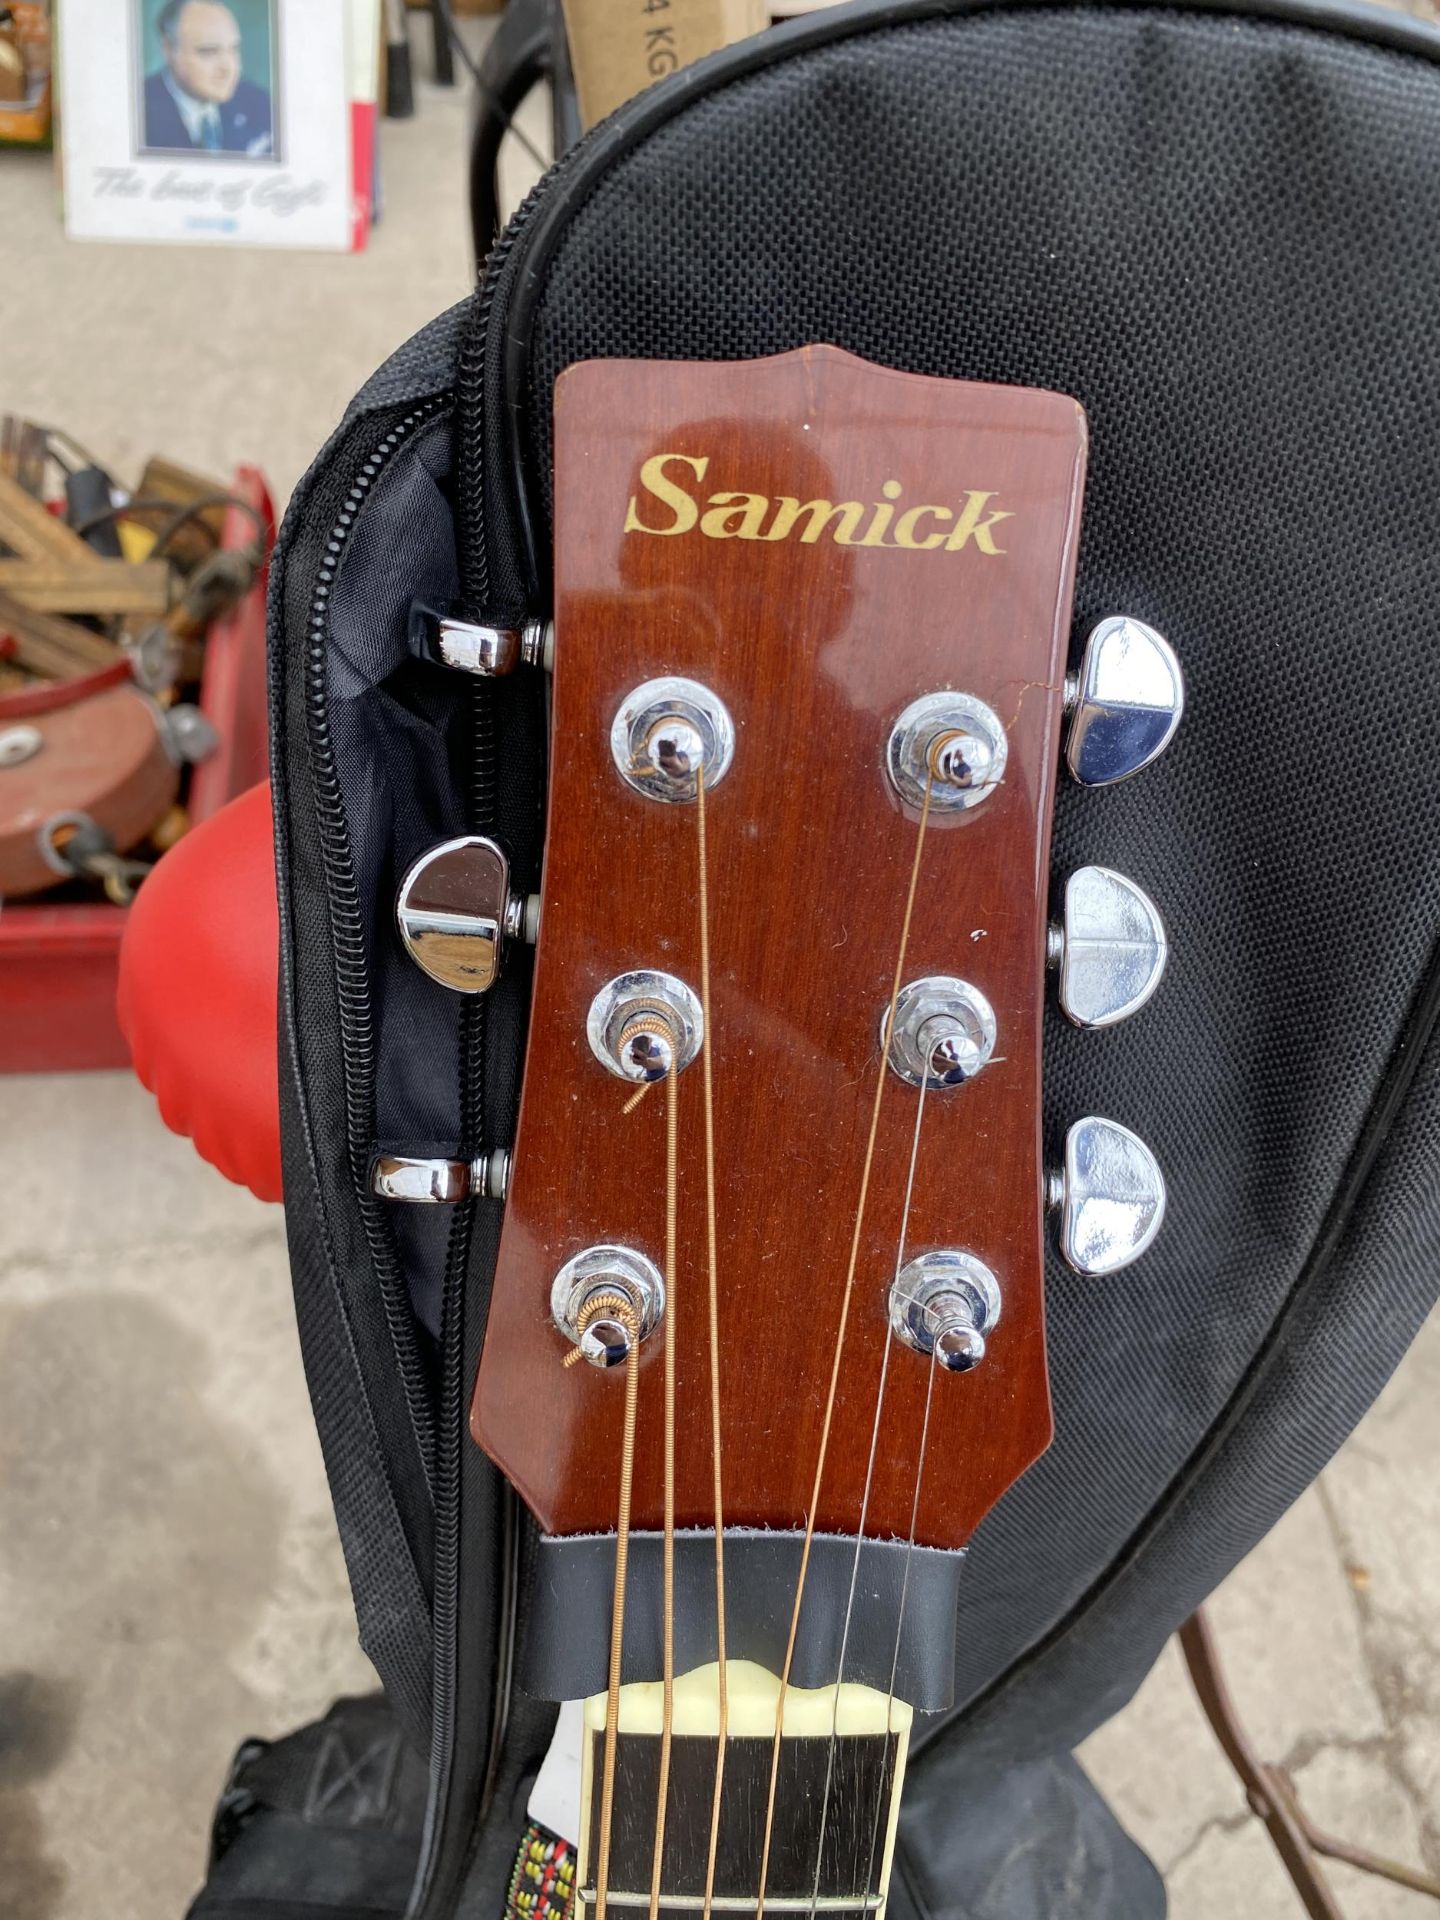 A SAMICK LW-028 GSA ACOUSTIC GUITAR WITH CARRY CASE - Image 2 of 4